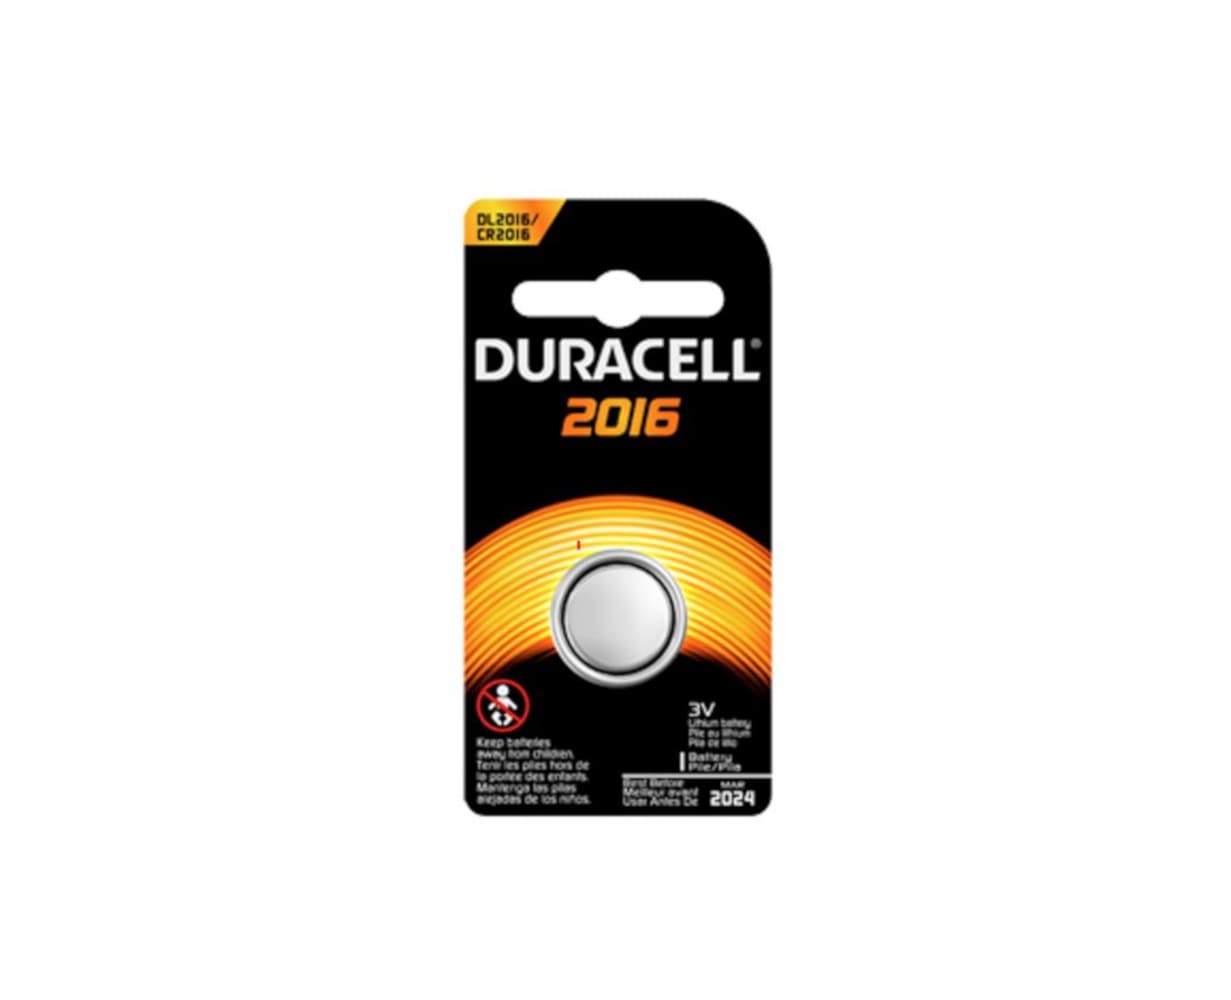 Duracell Lithium CR2016 Coin Batteries at